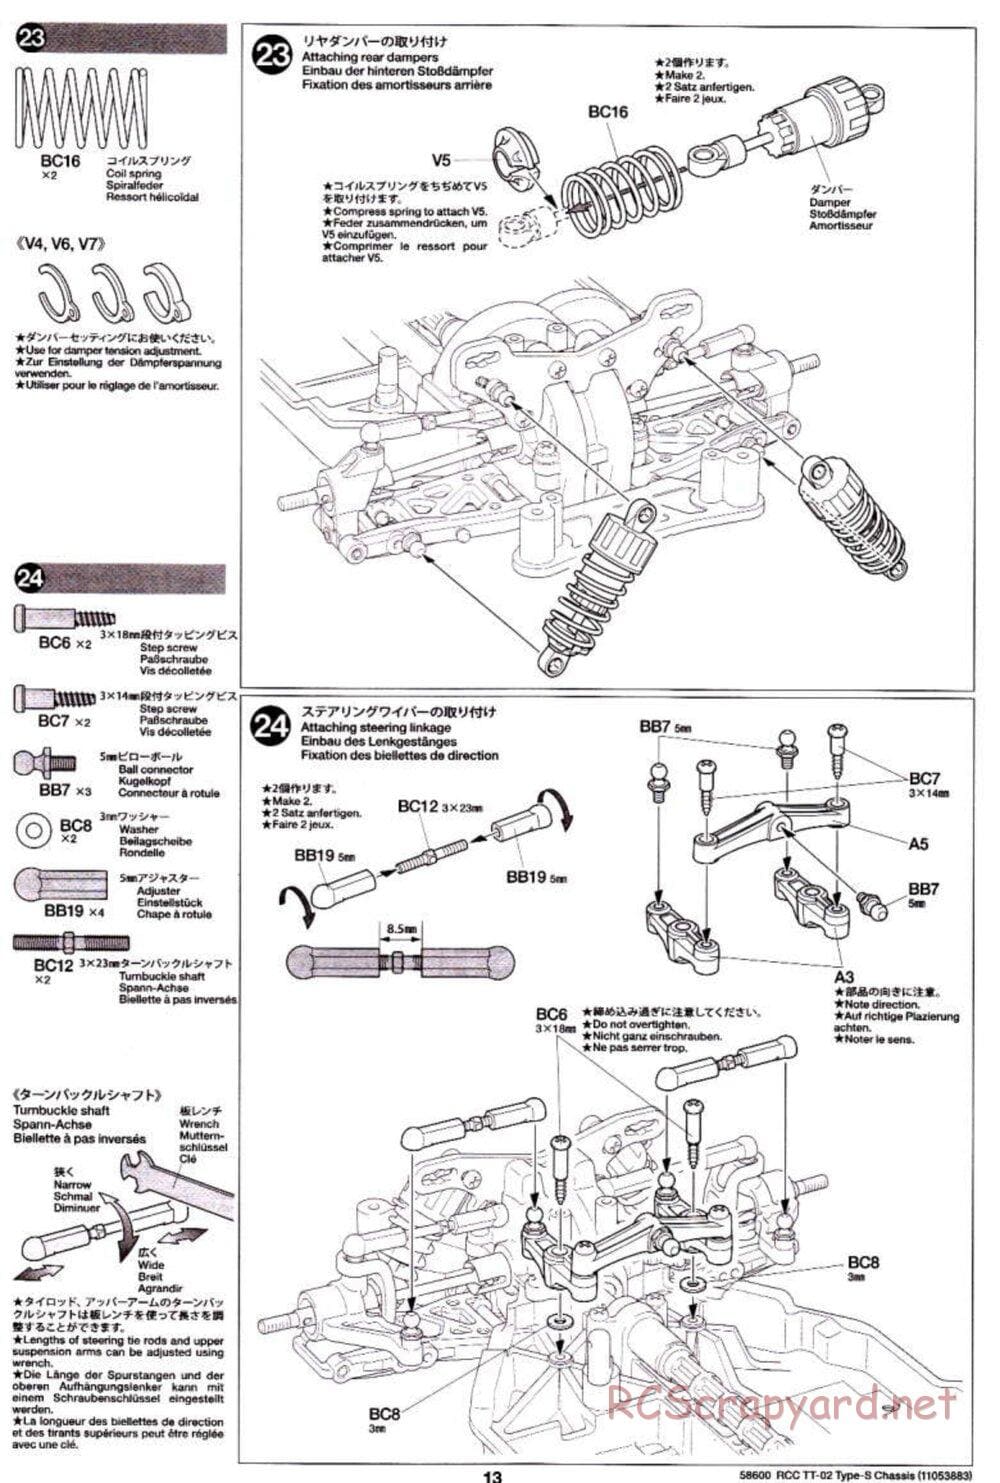 Tamiya - TT-02 Type-S Chassis - Manual - Page 13